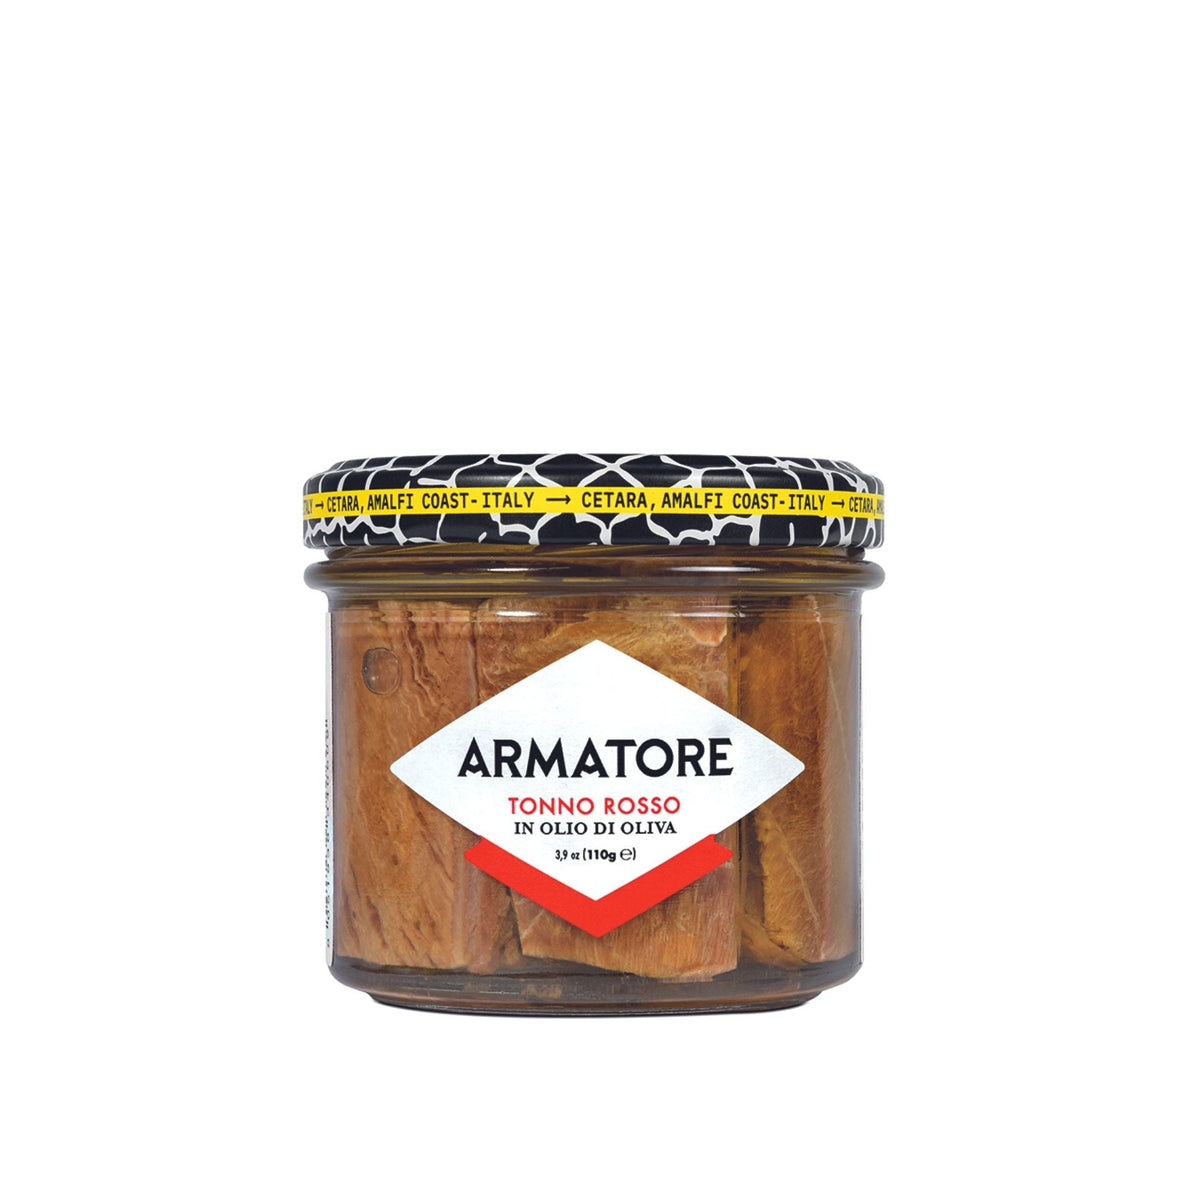 Armatore Bluefin Tuna Fillets in Olive Oil 110g  | Imported and distributed in the UK by Just Gourmet Foods